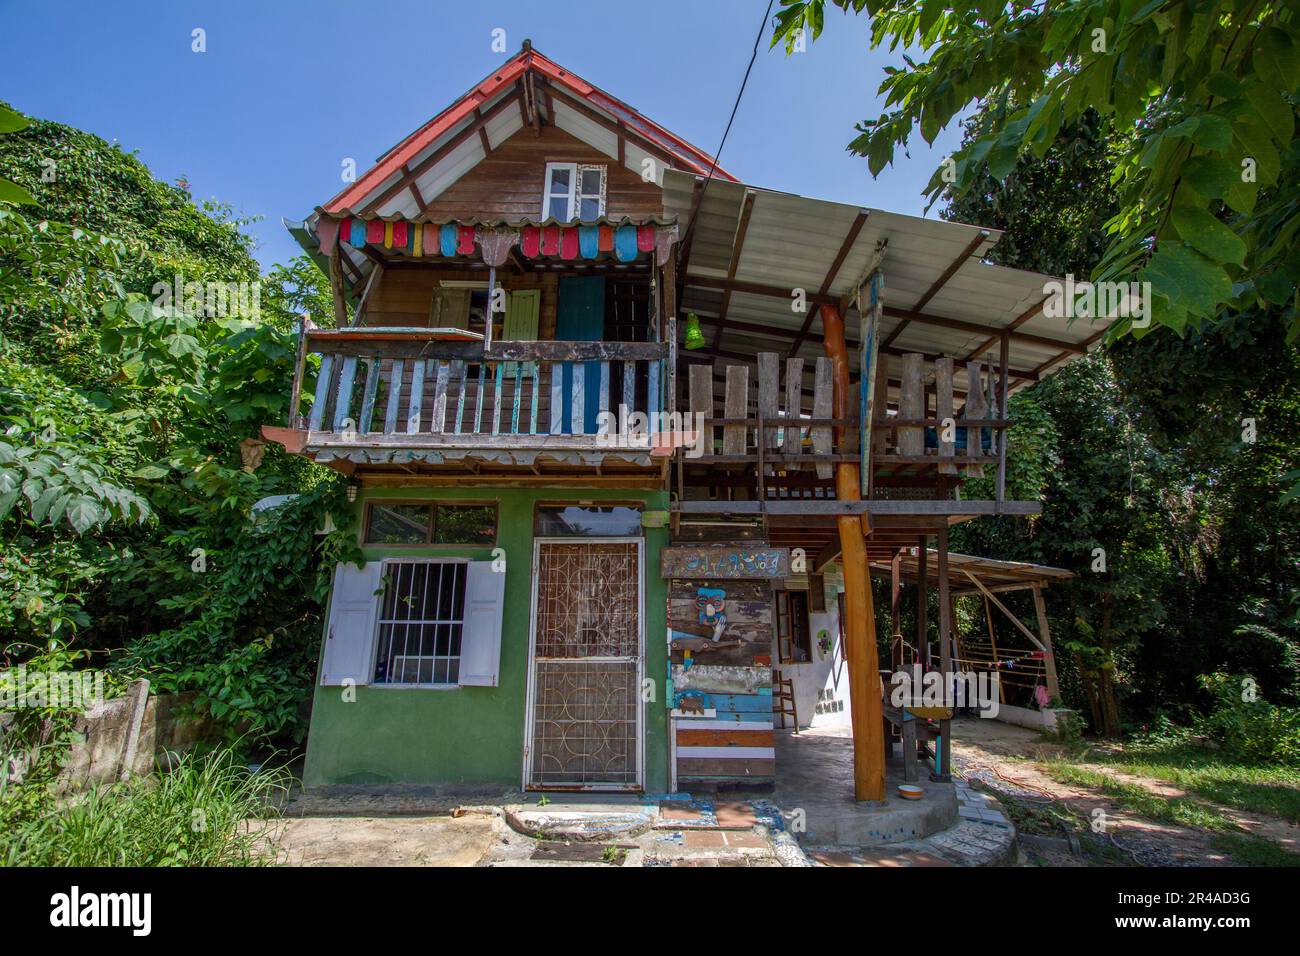 An aged two-story house with a wrap-around balcon. Stock Photo